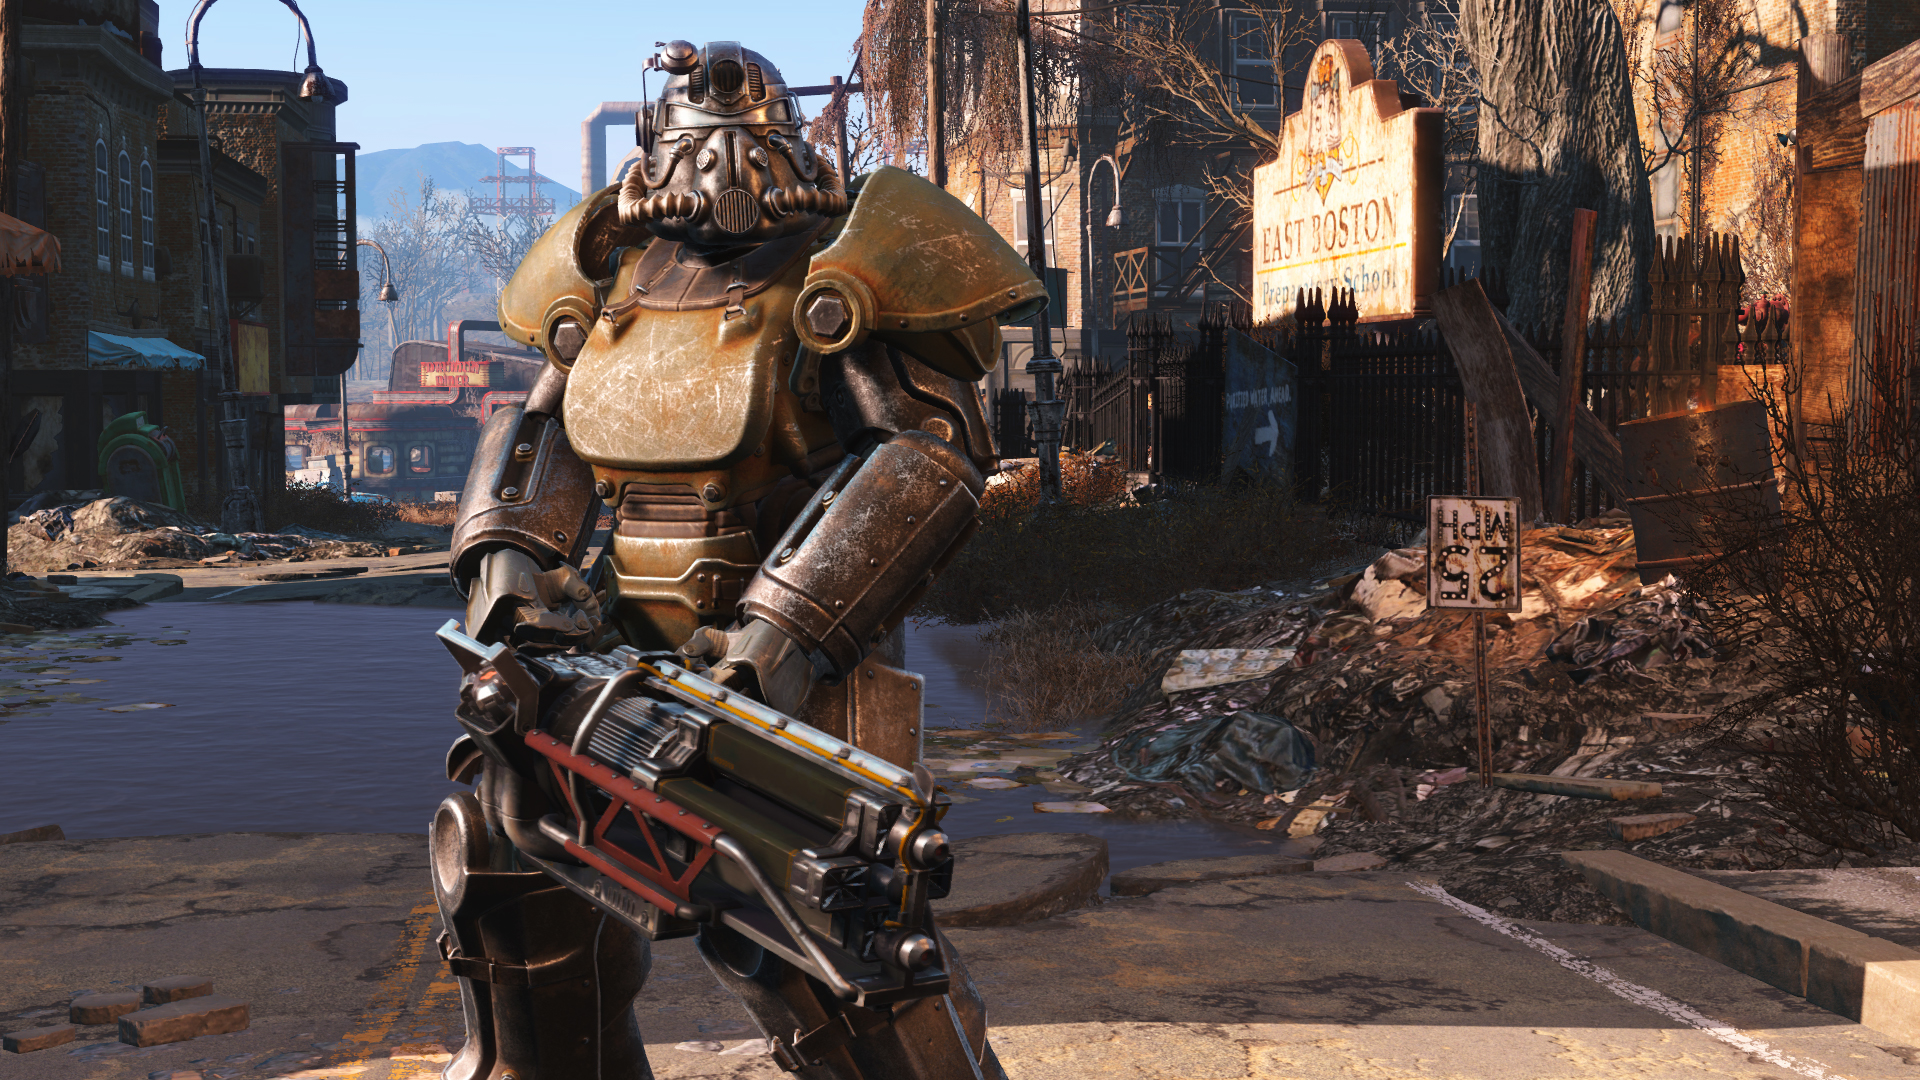 Bethesda details the graphics tech and effects in Fallout 4